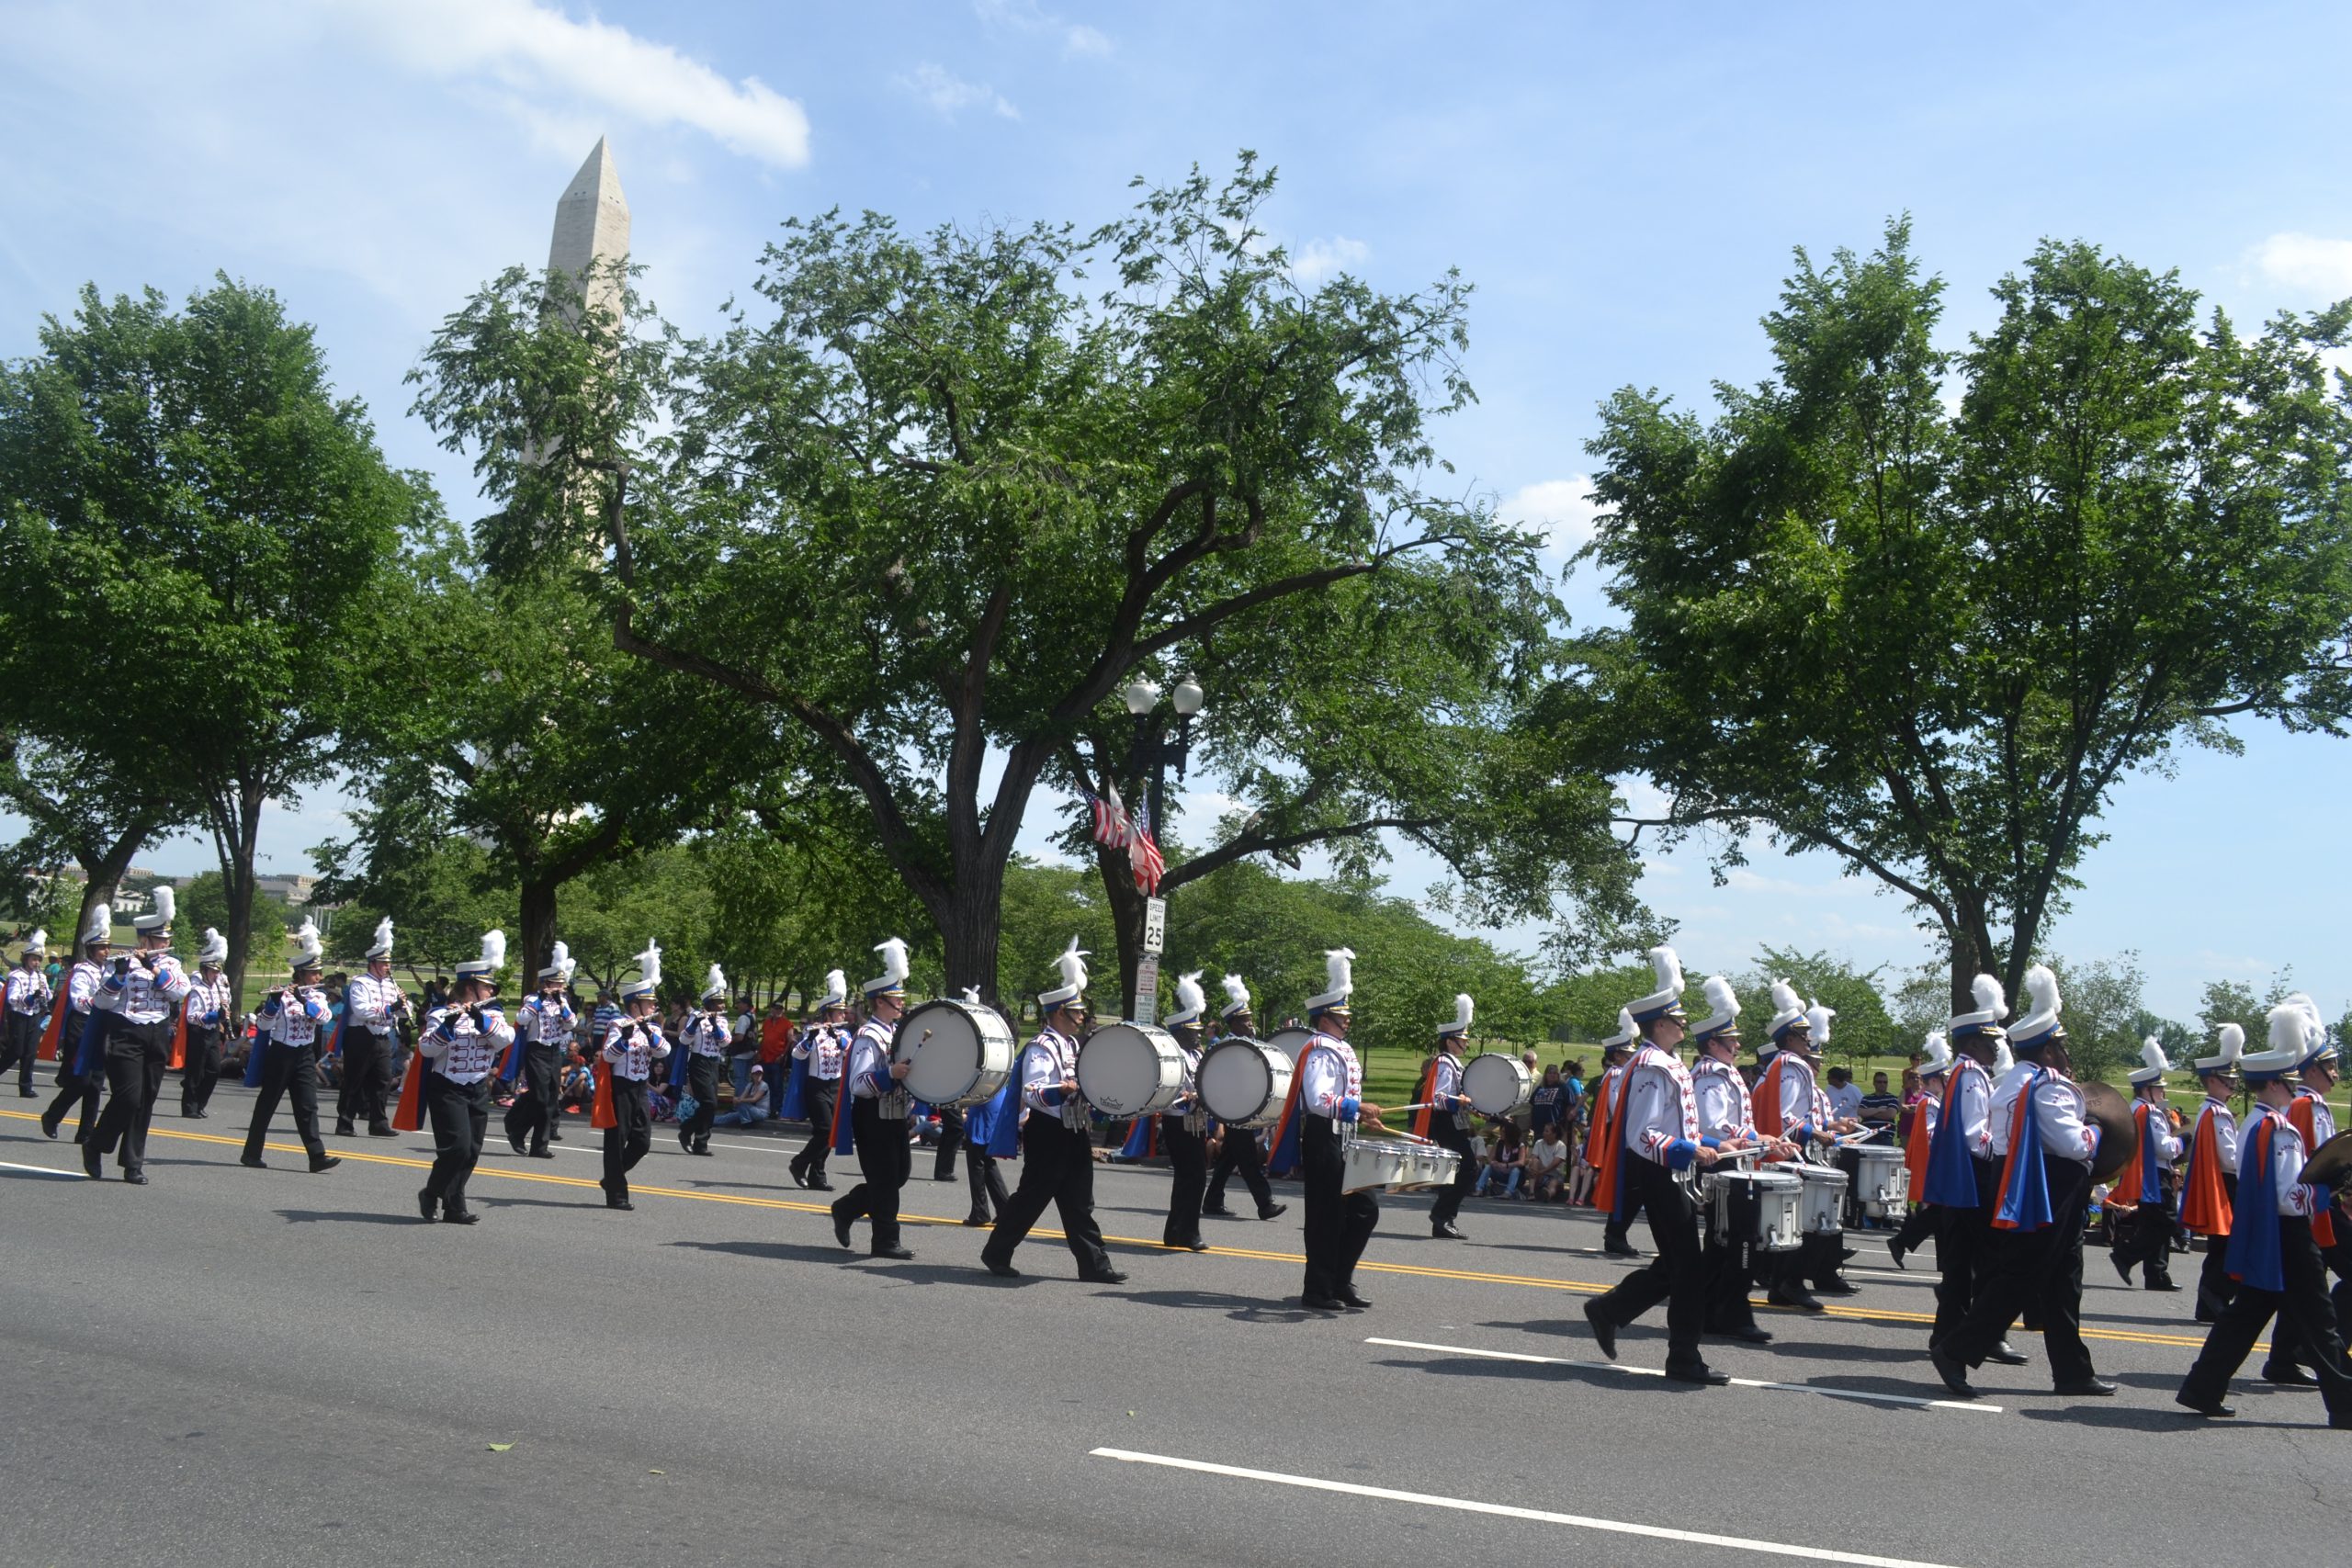 Marching band in street next to the Washington Monument in Washington DC